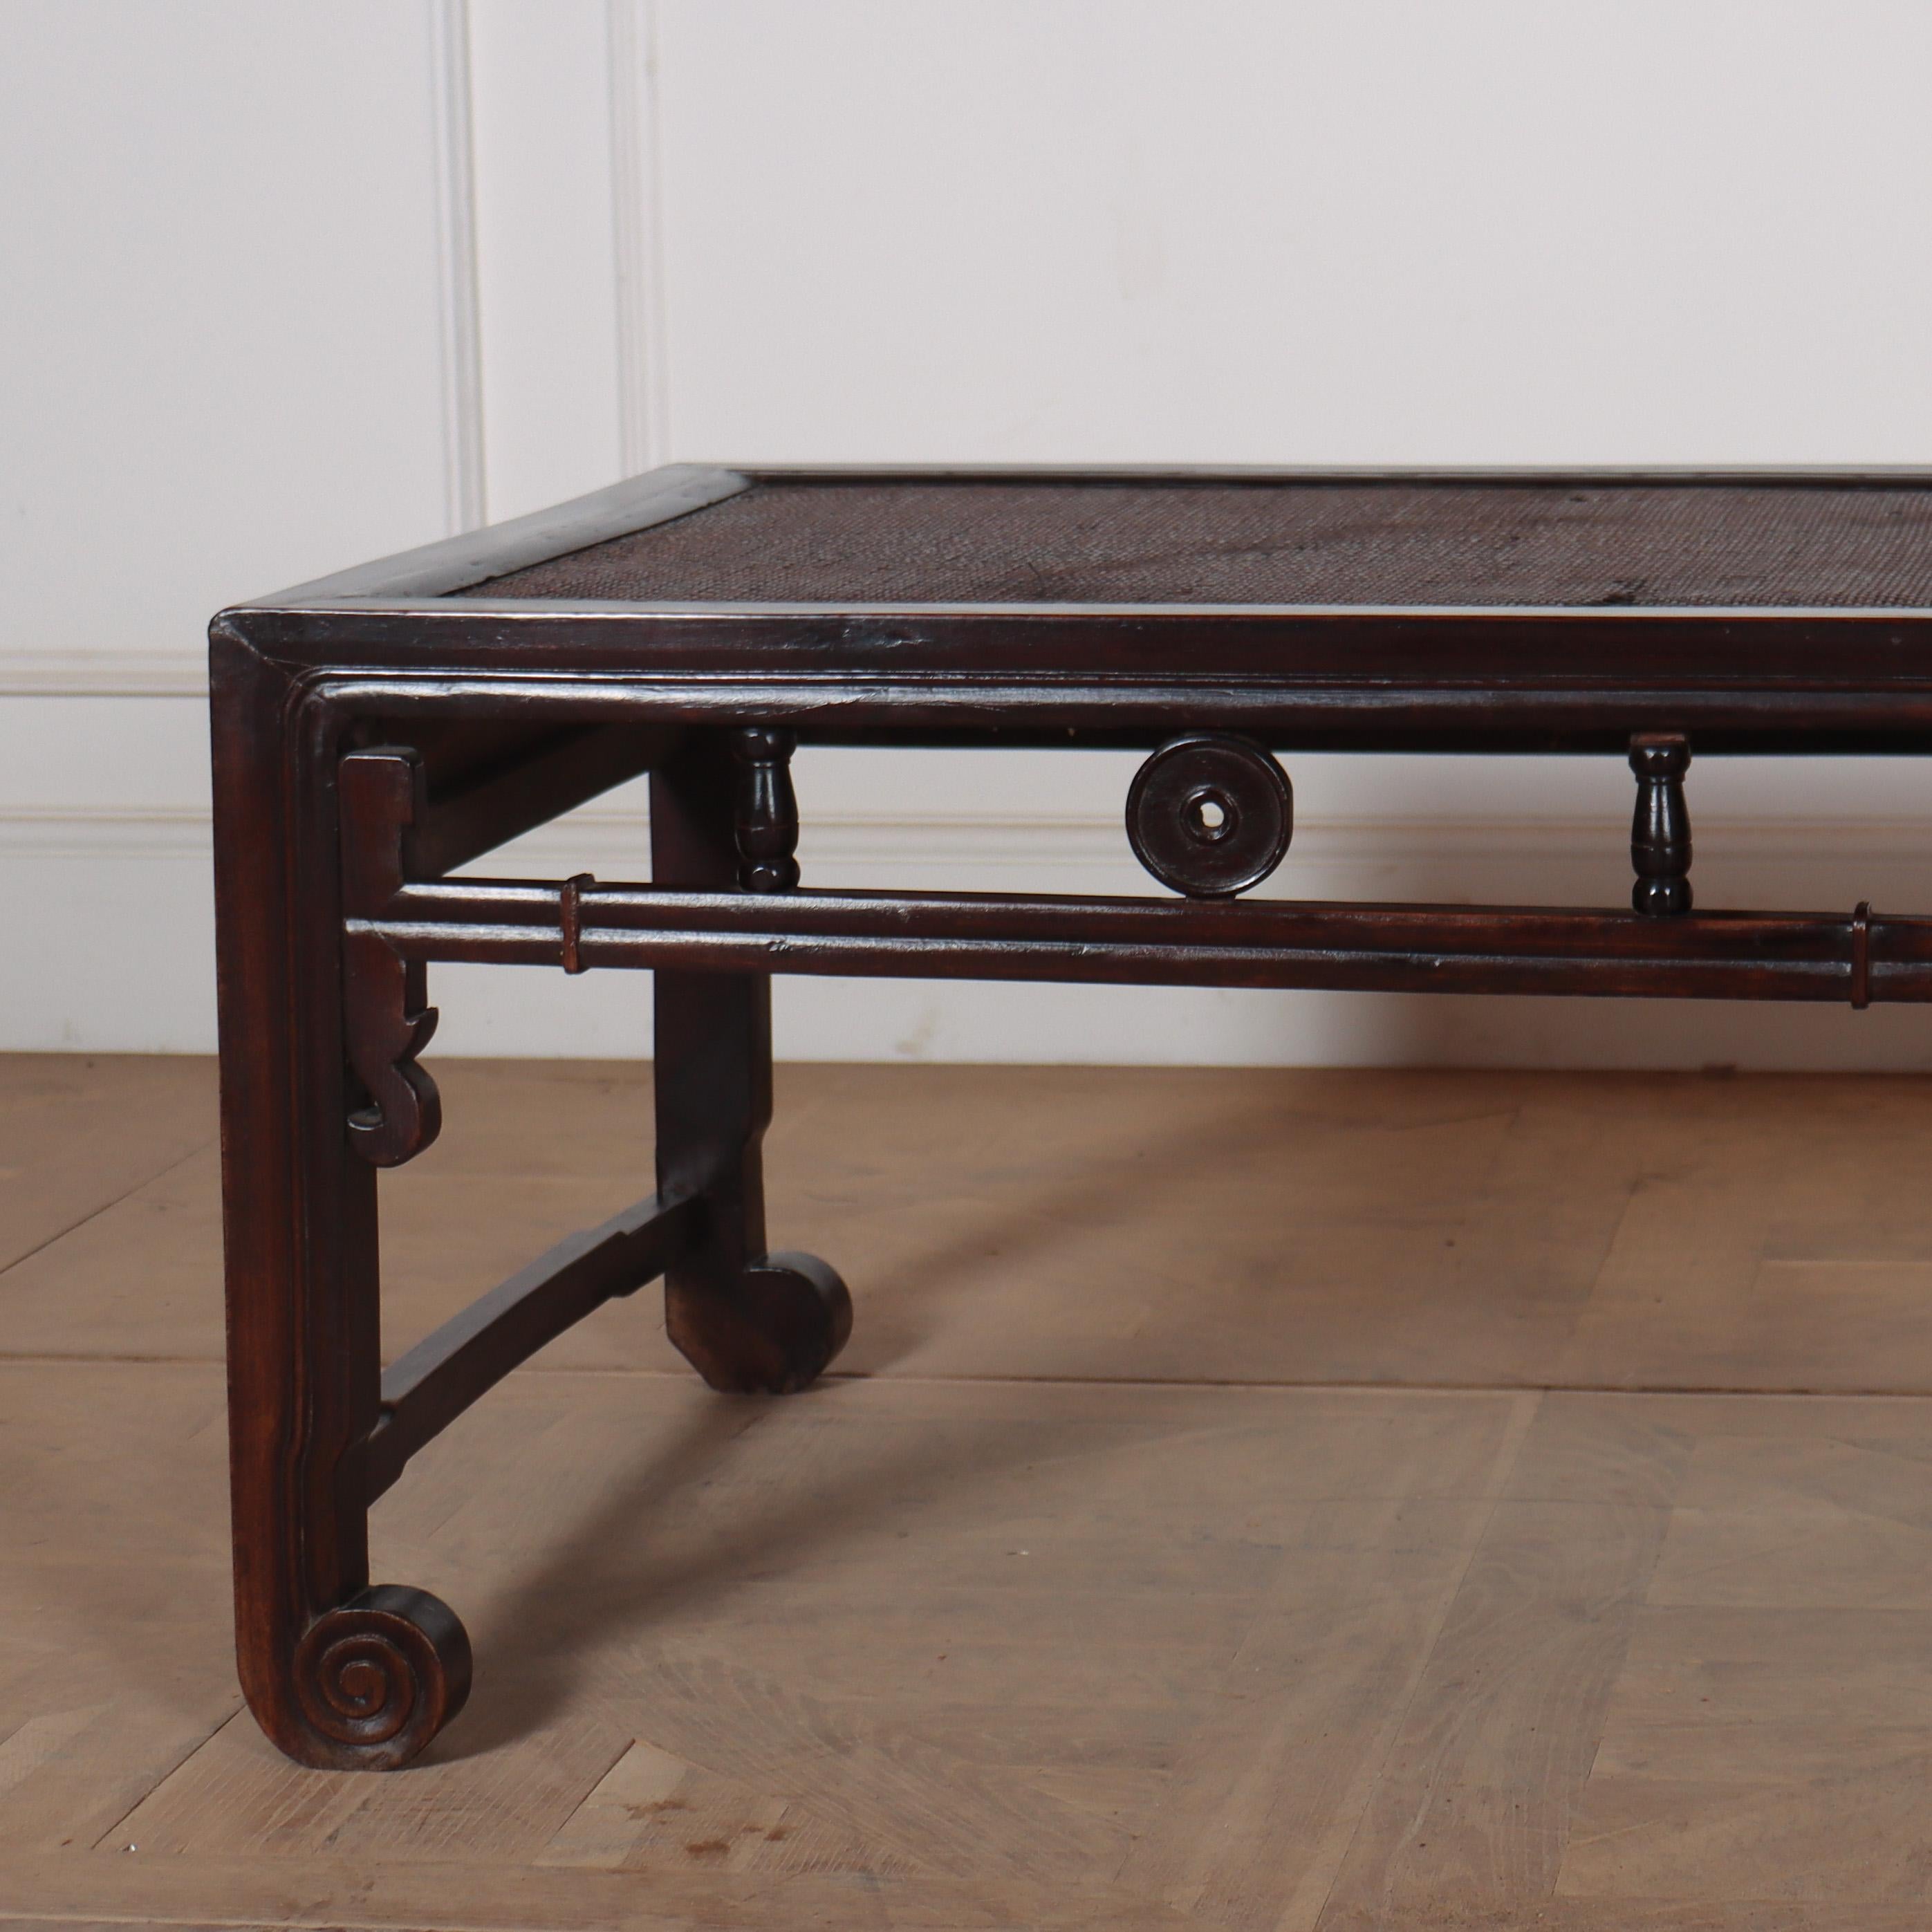 Good 19th C original stained Chinese pine low table / coffee table with a rattan insert. 1880.

Reference: 8033

Dimensions
65 inches (165 cms) Wide
28 inches (71 cms) Deep
19.5 inches (50 cms) High